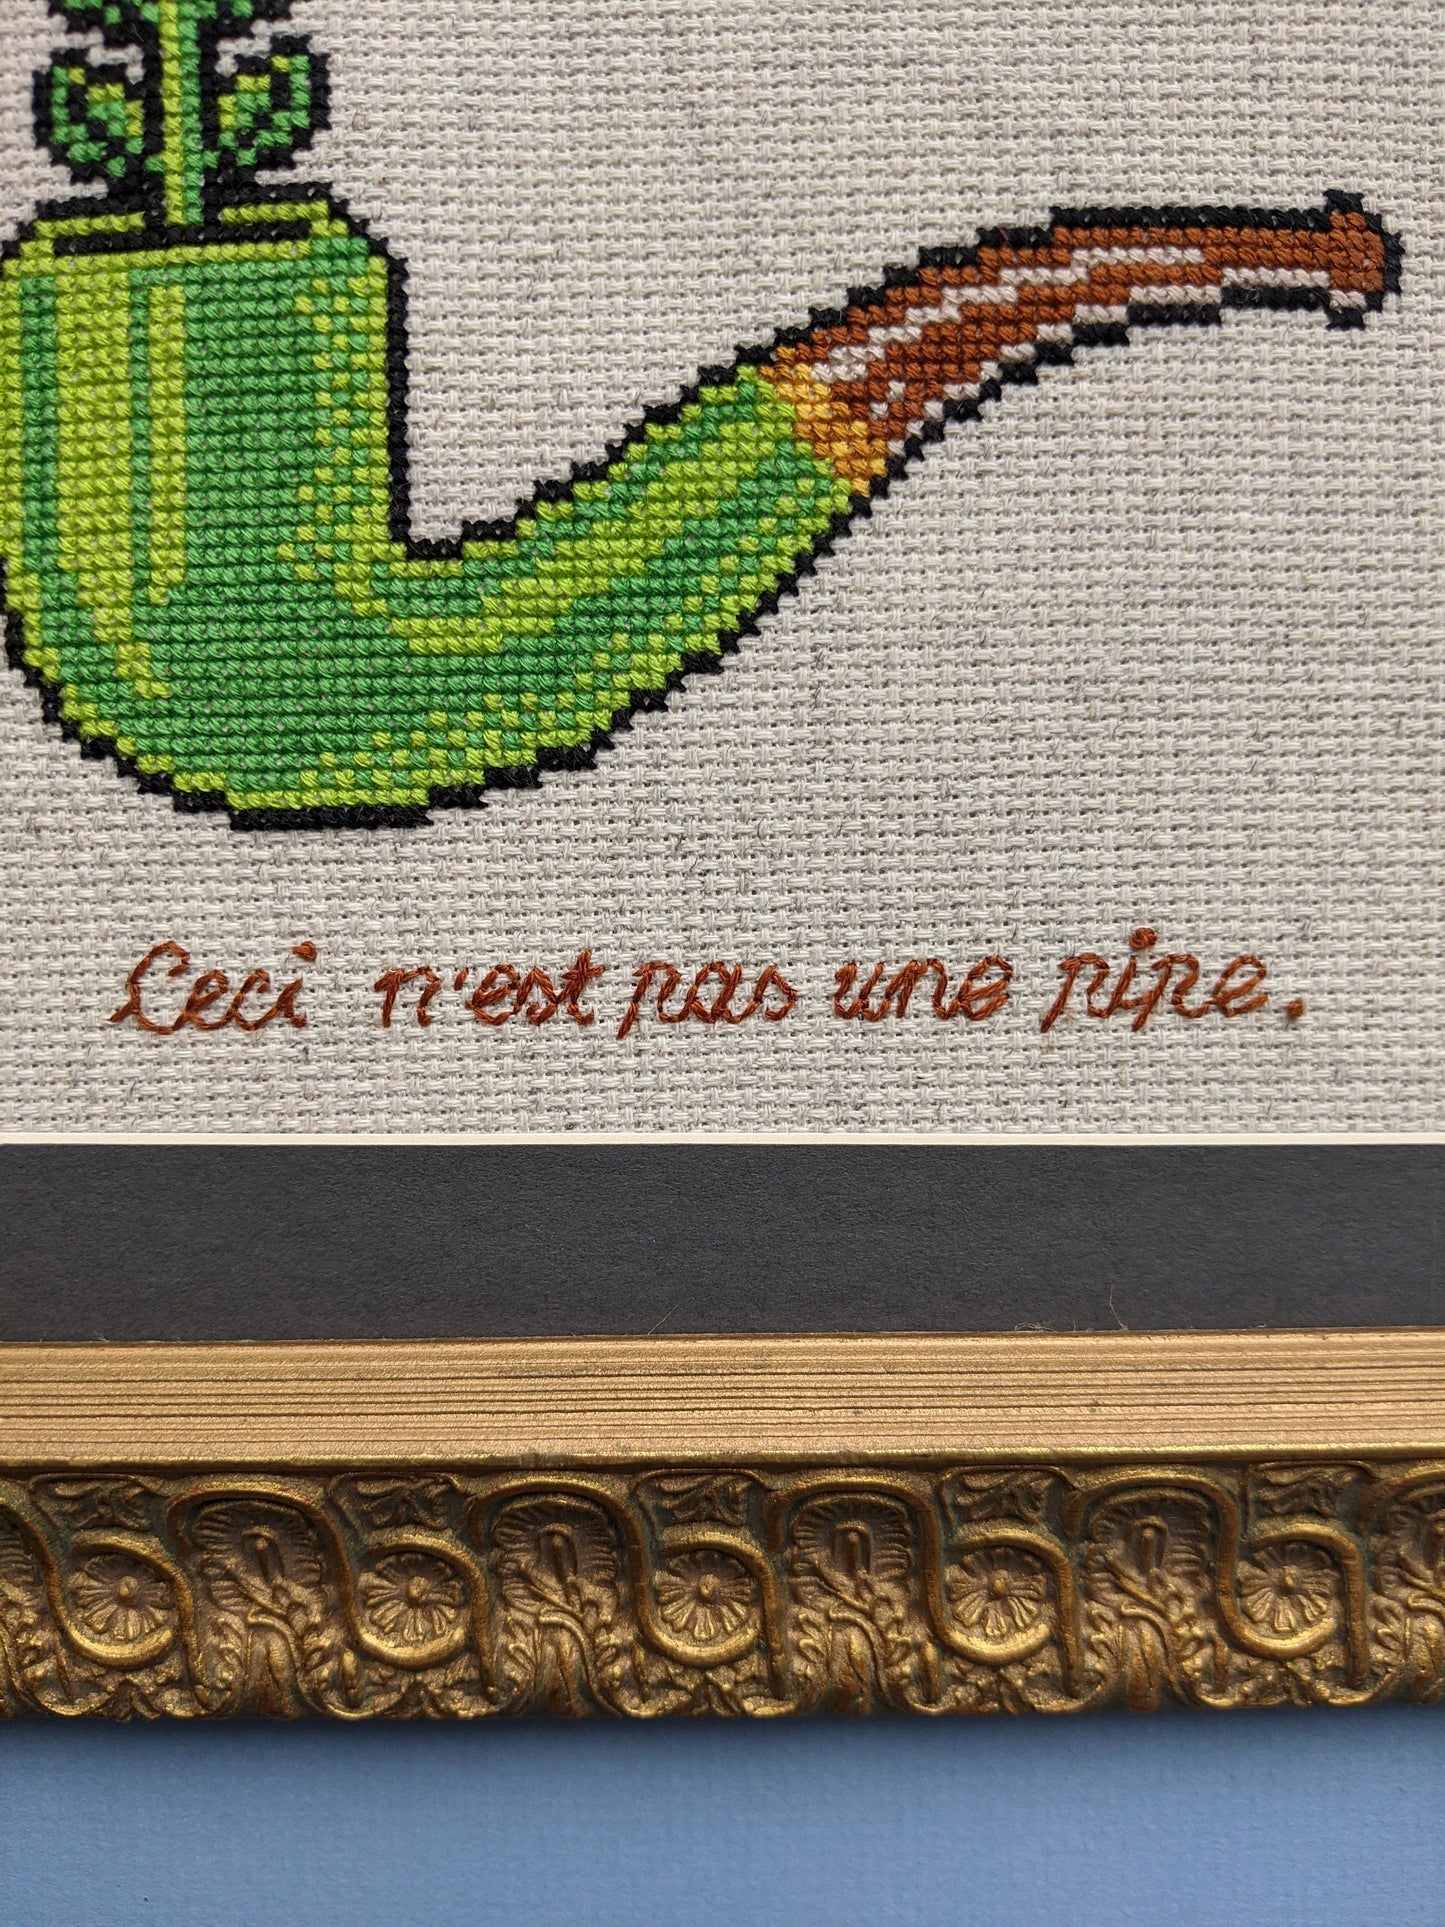 This is not a (warp) pipe: Magritte Meets Mario PDF subversive cross stitch pattern - instant download (video game vs Modern art parody)